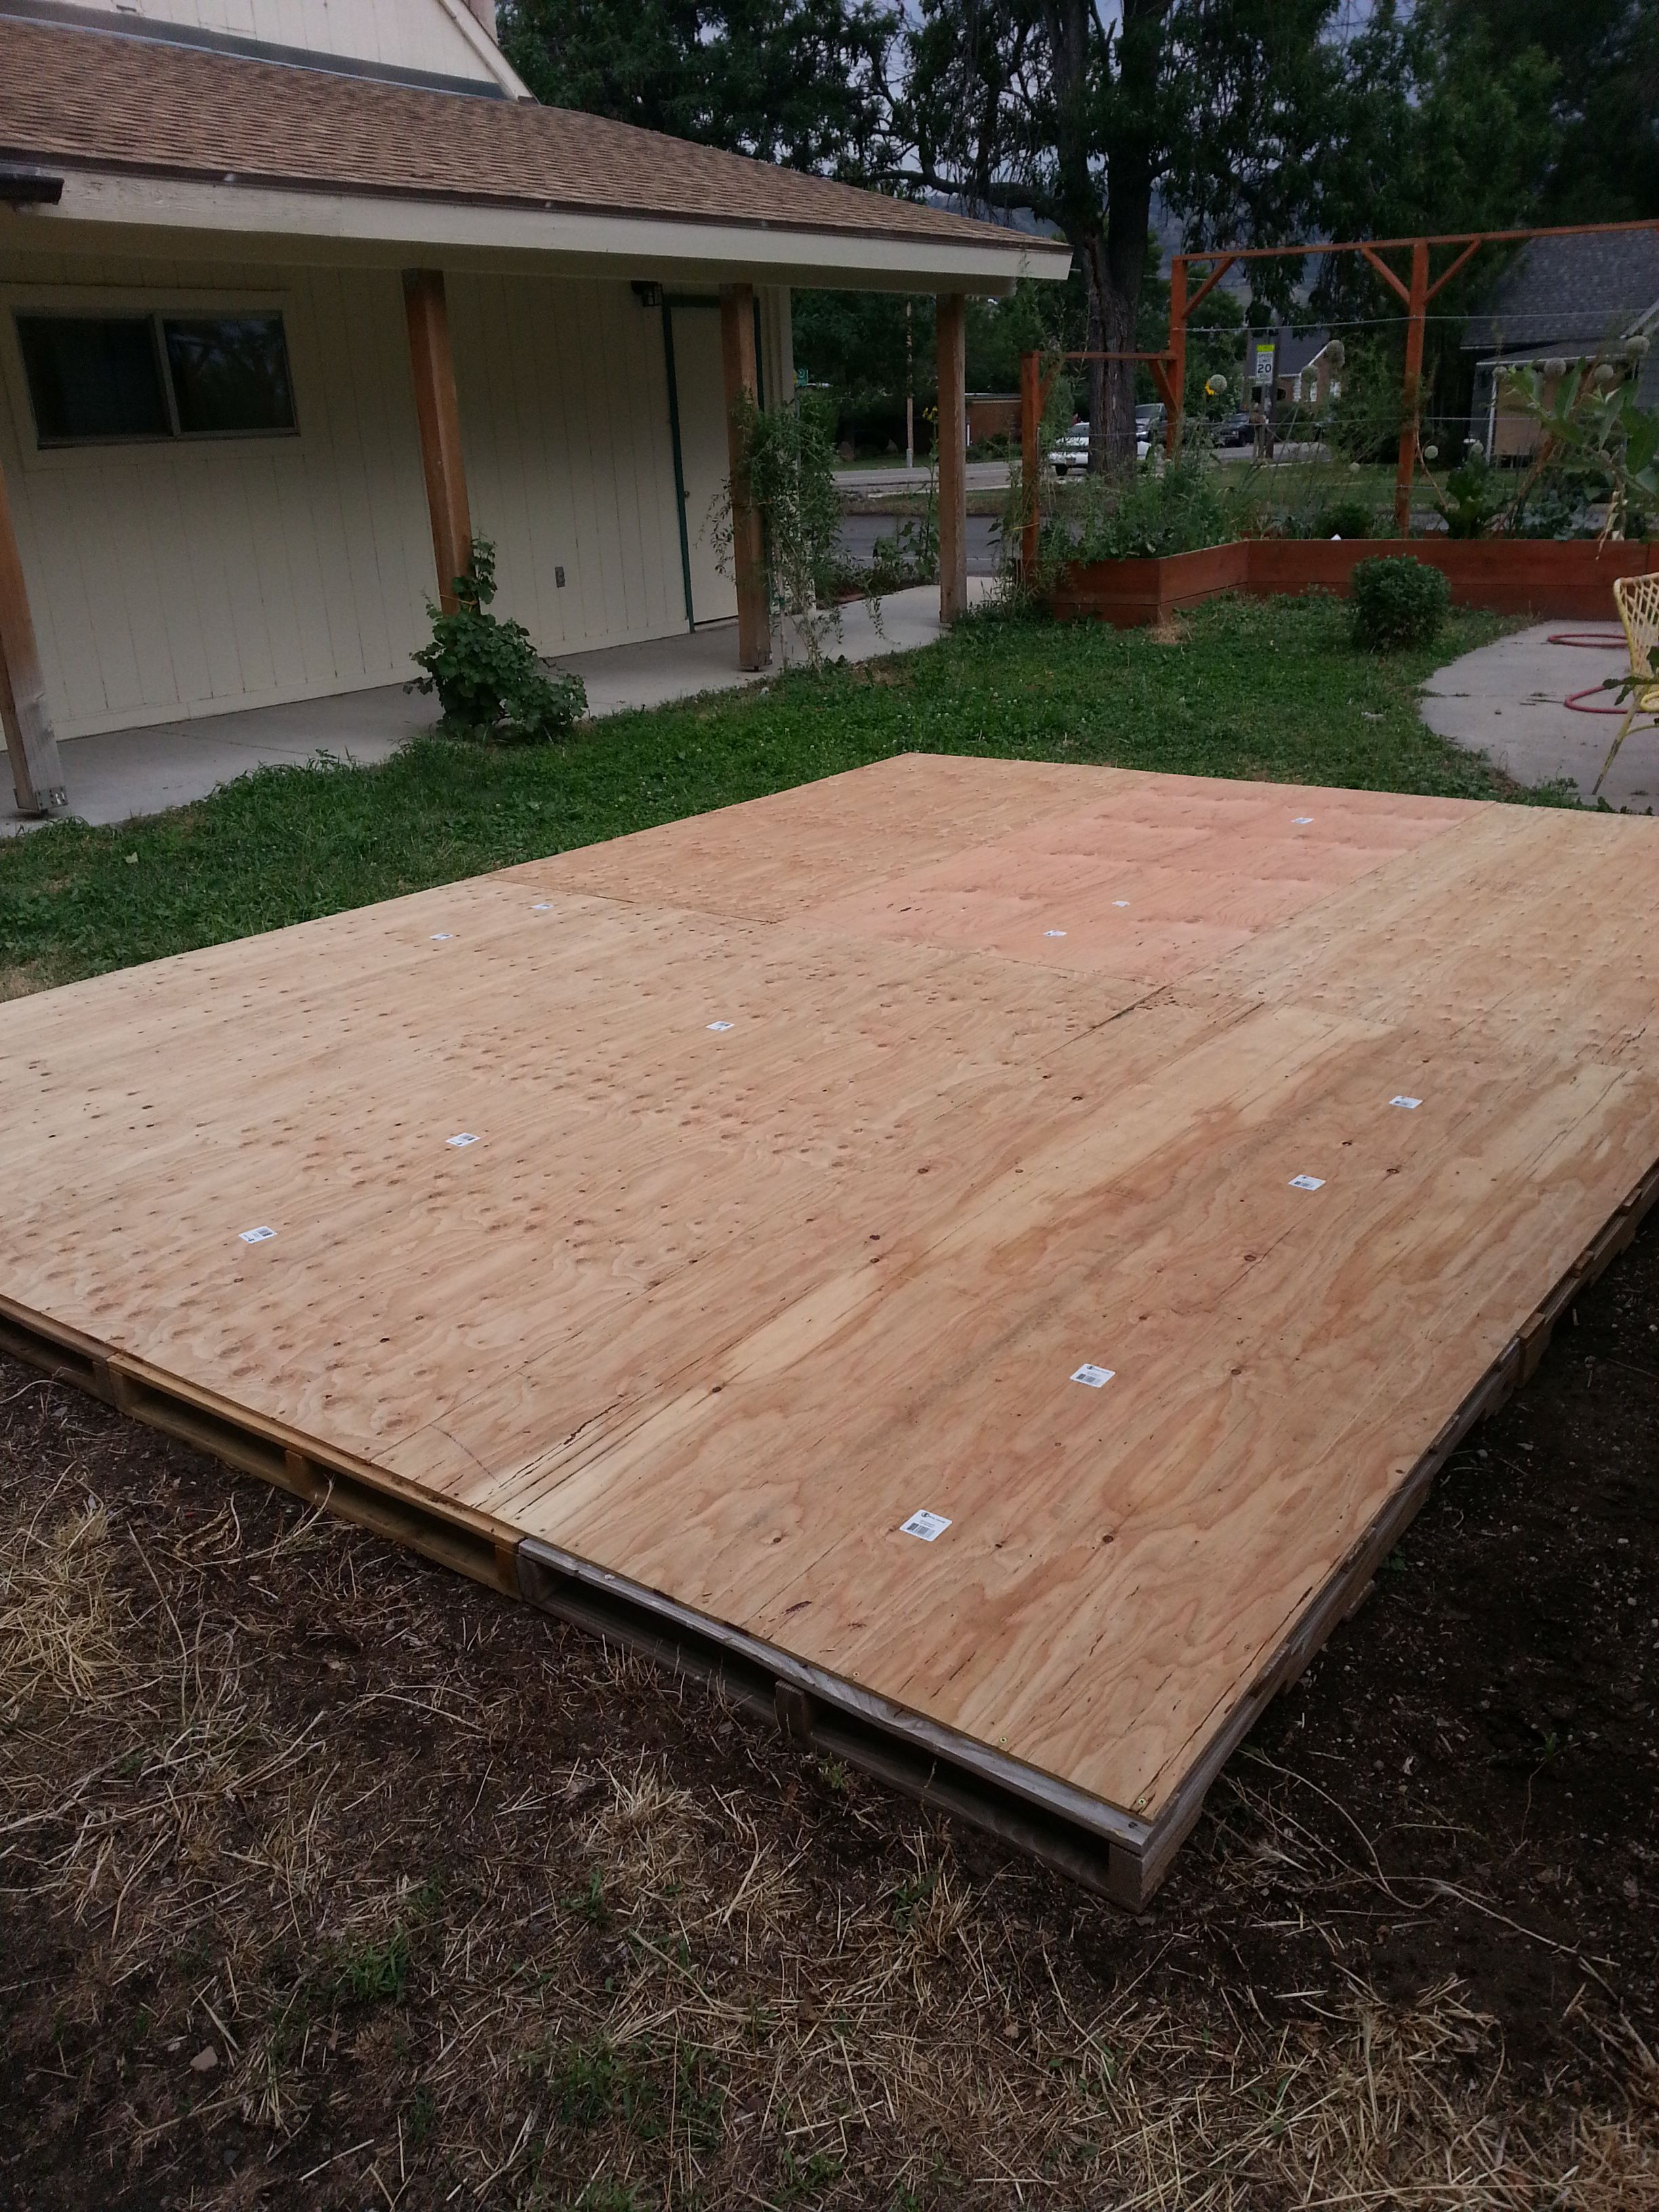 This is a pretty easy project to do considering how cool this dance floor turns out.  My brother made thi